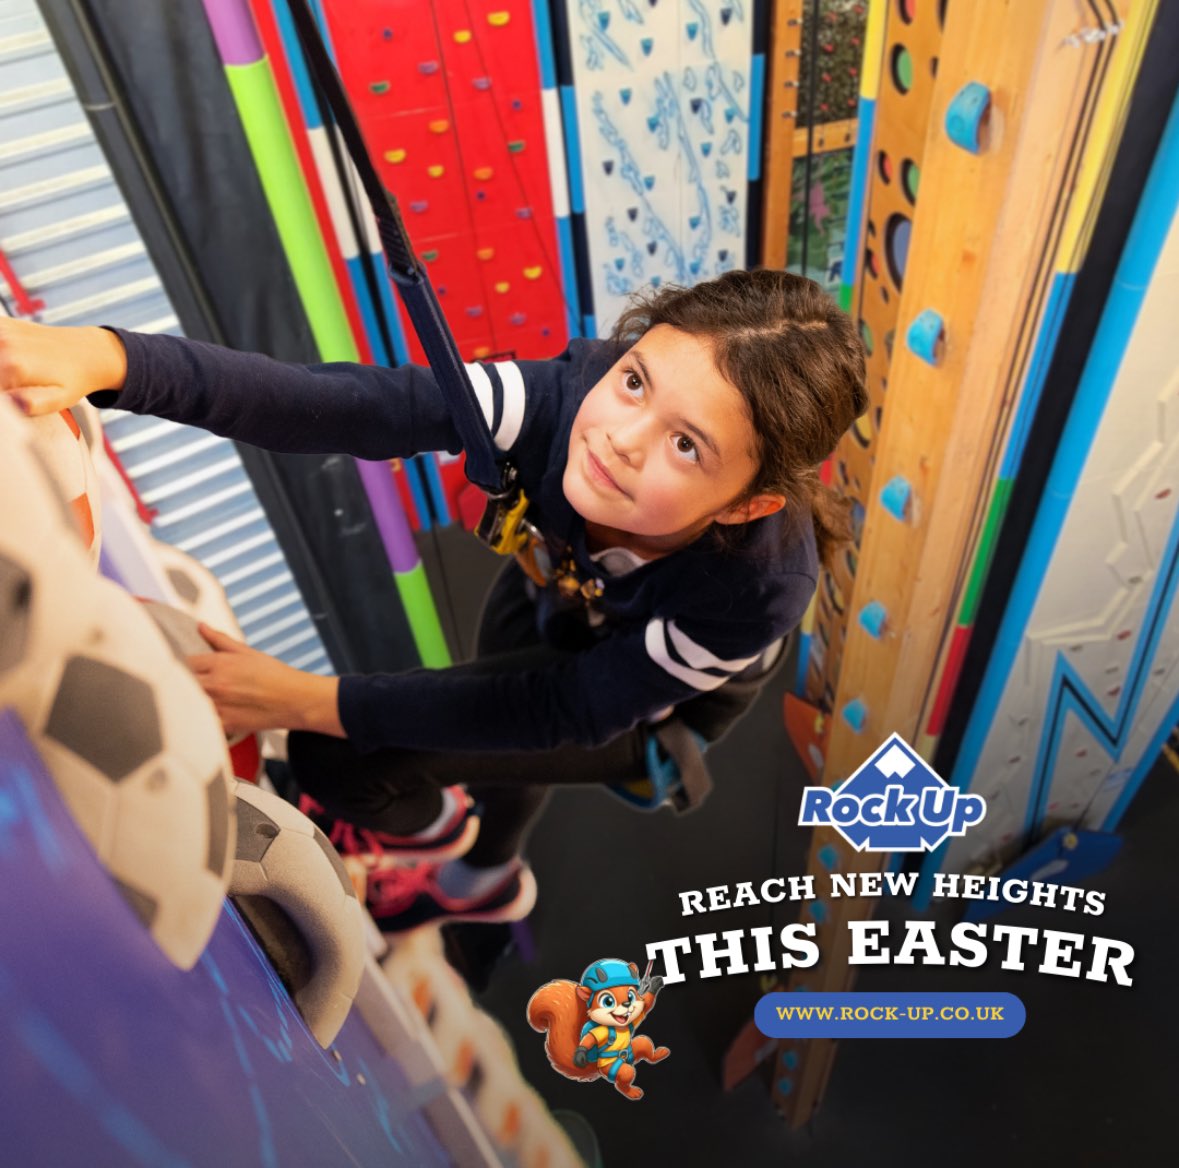 Climb like a Gladiator this Easter at @rockupadventure in Watford!  Unleash your inner warrior & Reach New Heights as a family during the holidays.  Make memories together by summiting our climbing walls, exploring in our soft play & refuelling with delicious refreshments.